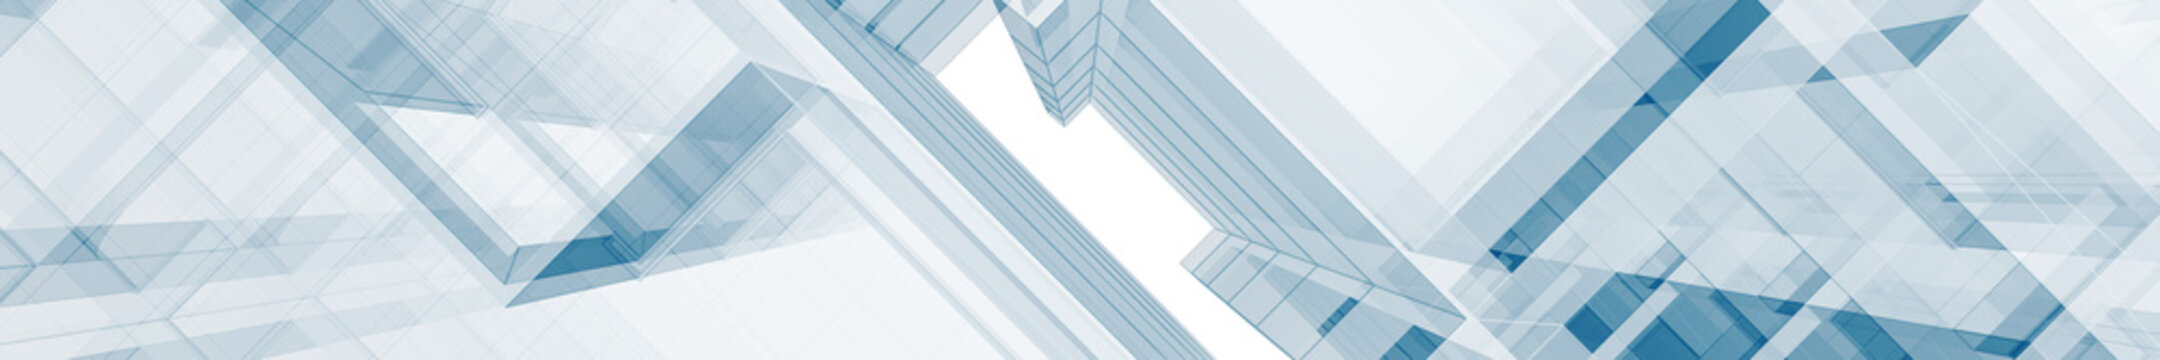 Abstract Blue Architecture 3d Rendering